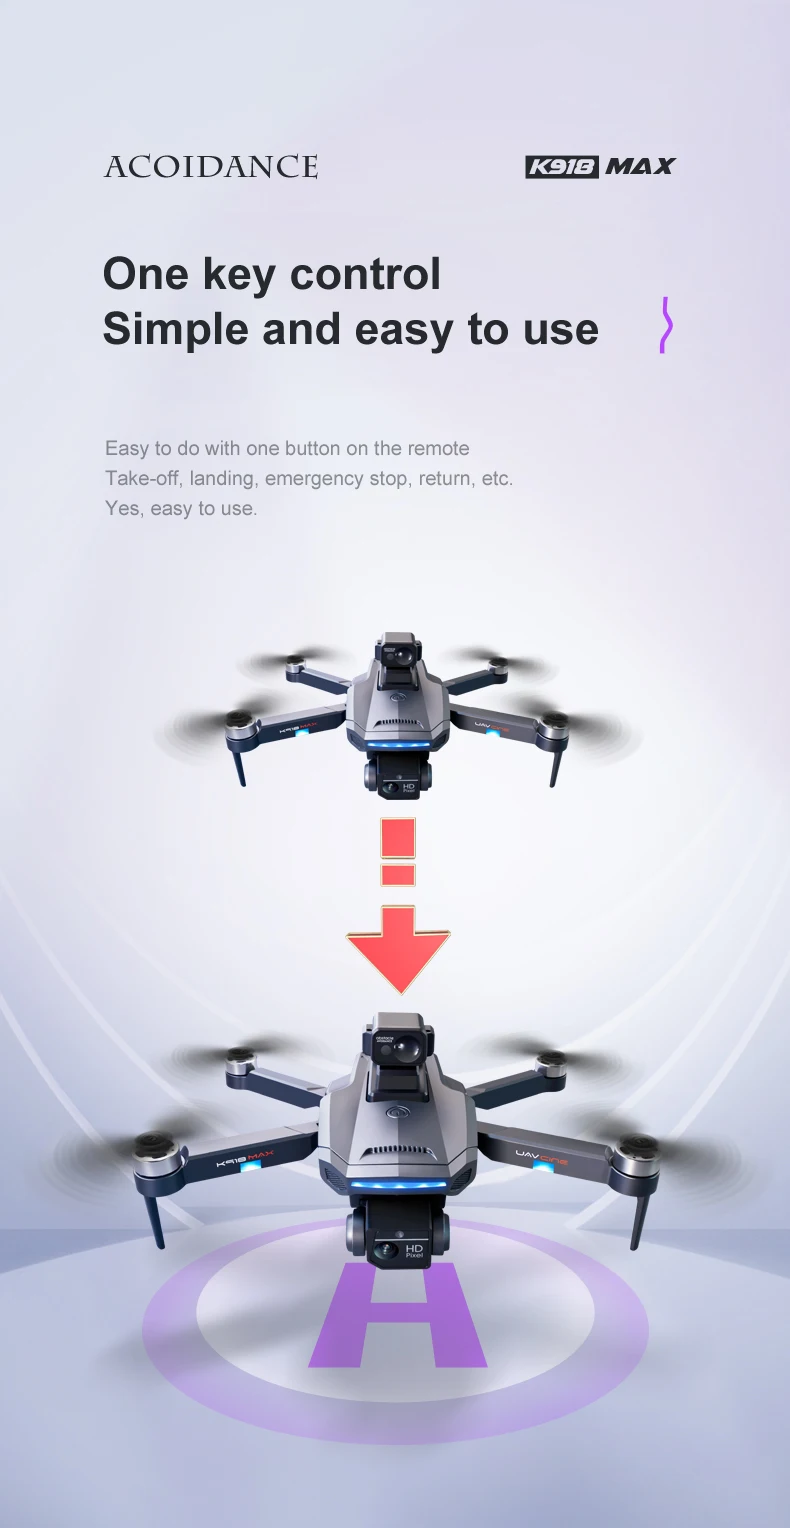 JINEHNG K918 MAX GPS Drone, ACOIDANCE K91D MAX One key control Simple and easy to use Easy to